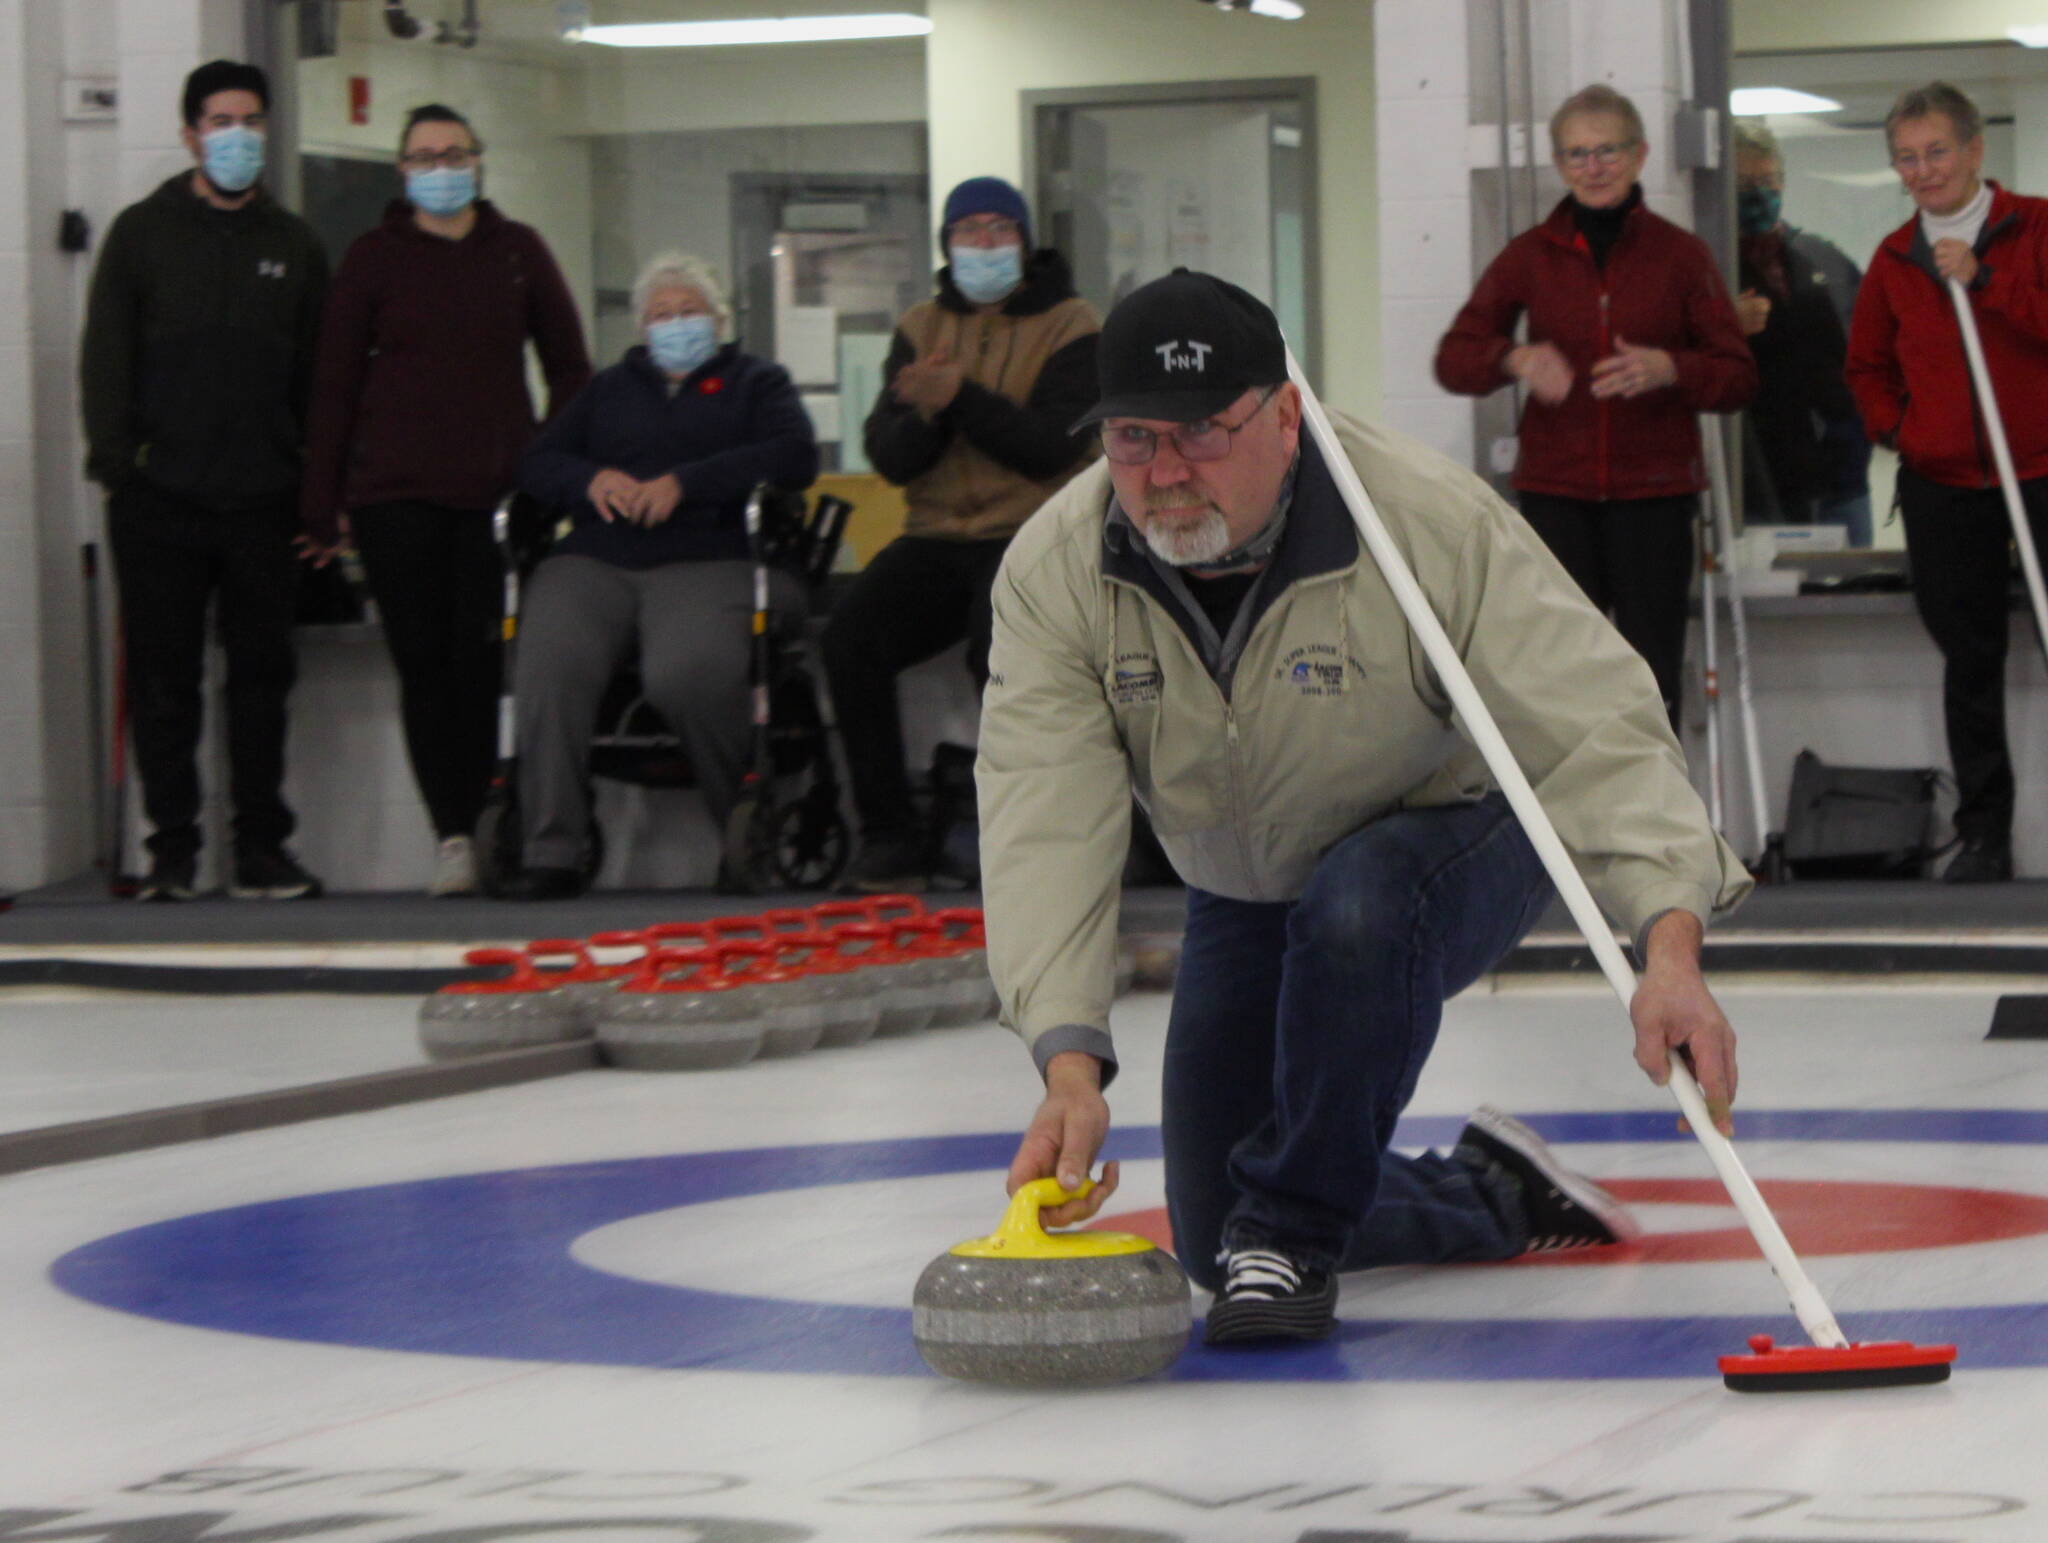 27180325_web1_211118-LAC-curling-tribute-stol-lacombe-curling_4